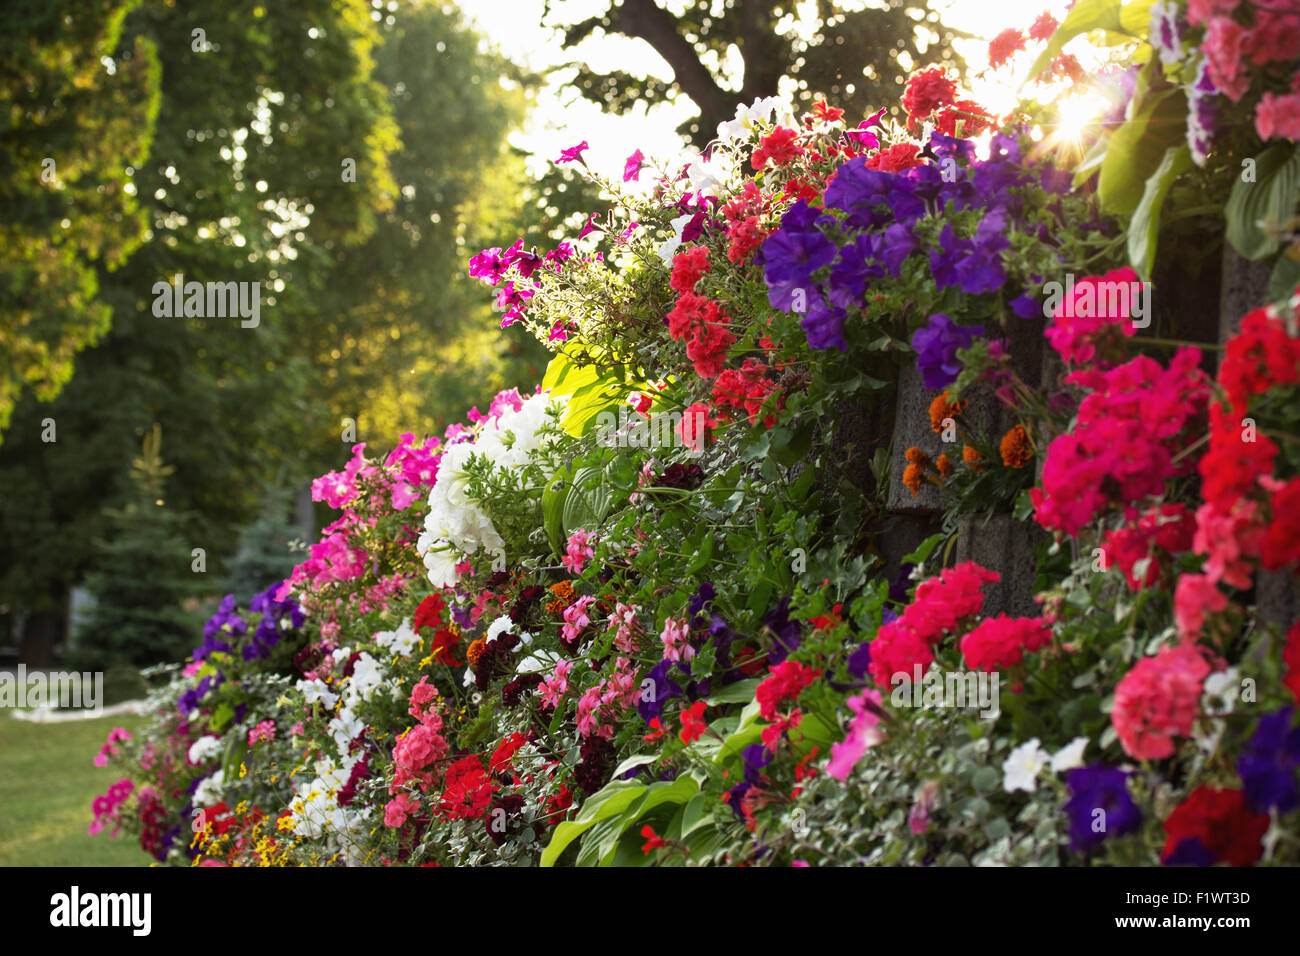 flowerbed of colorful flowers. Stock Photo